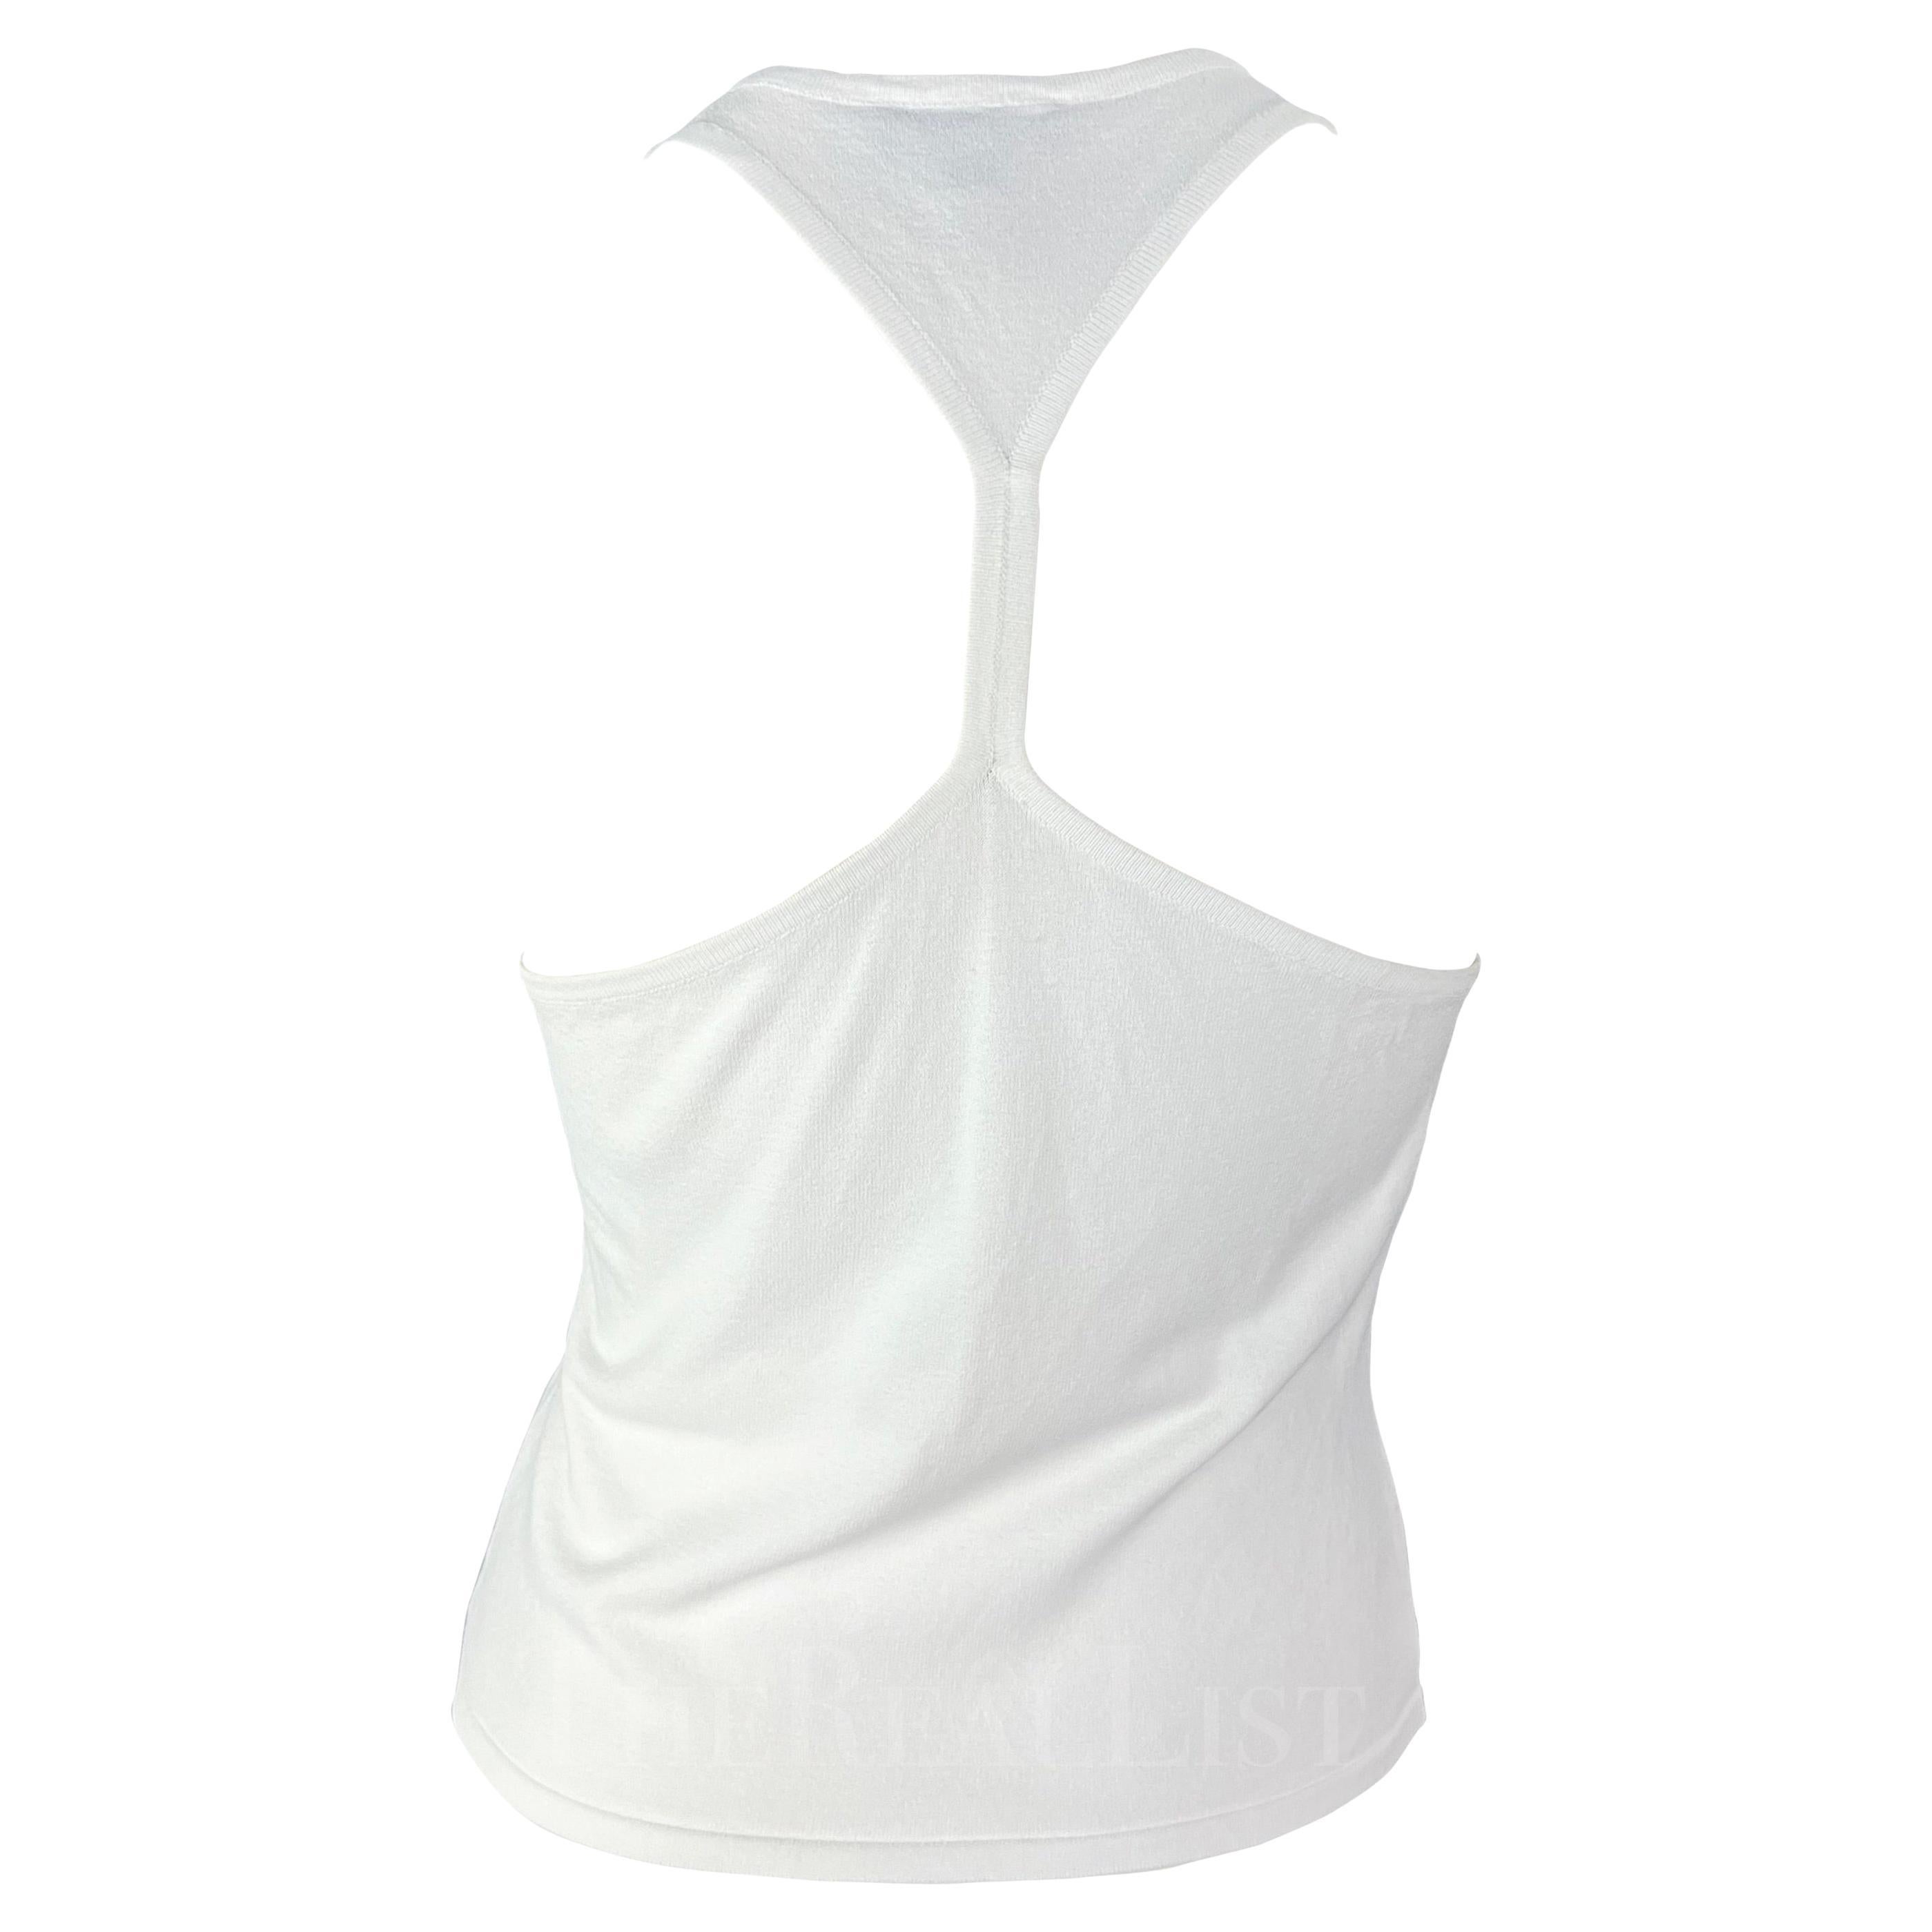 S/S 1998 Gucci by Tom Ford White Stretch Knit Racerback Tank Top en vente